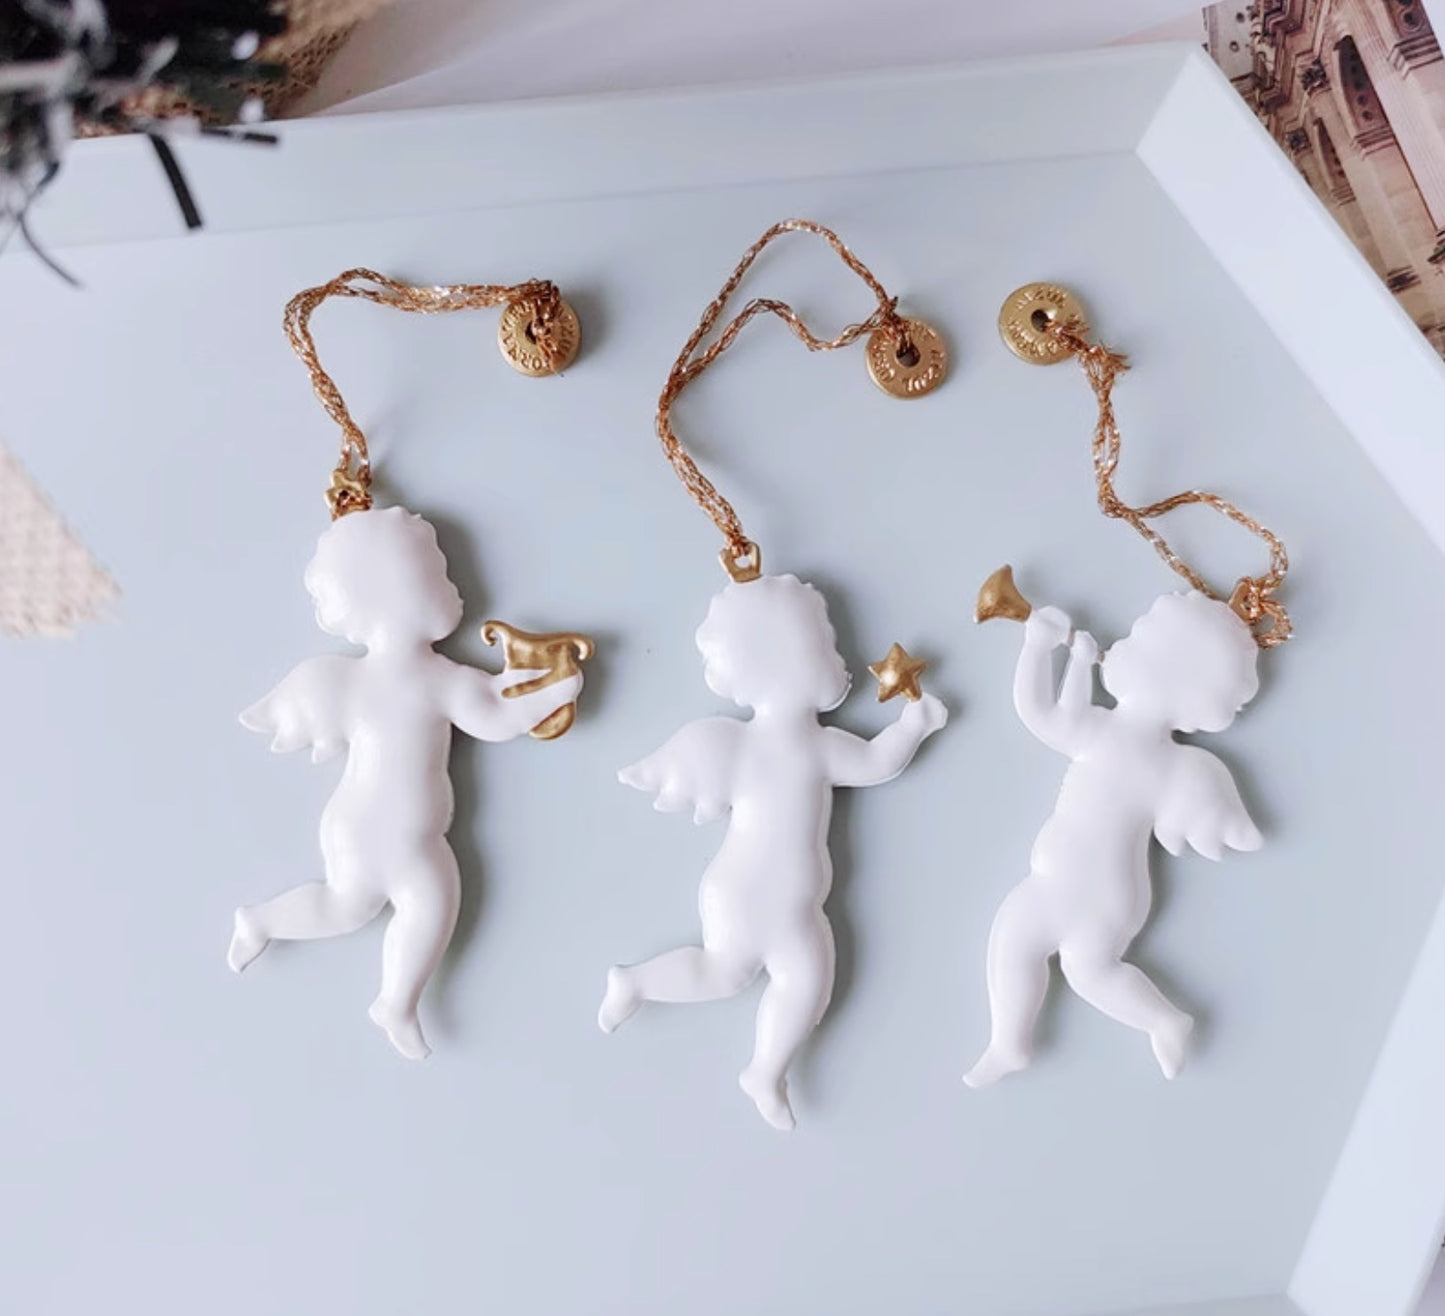 Vintage style hand-painted metallic Christmas Decoration, White and Gold small set 7pcs, 7cm